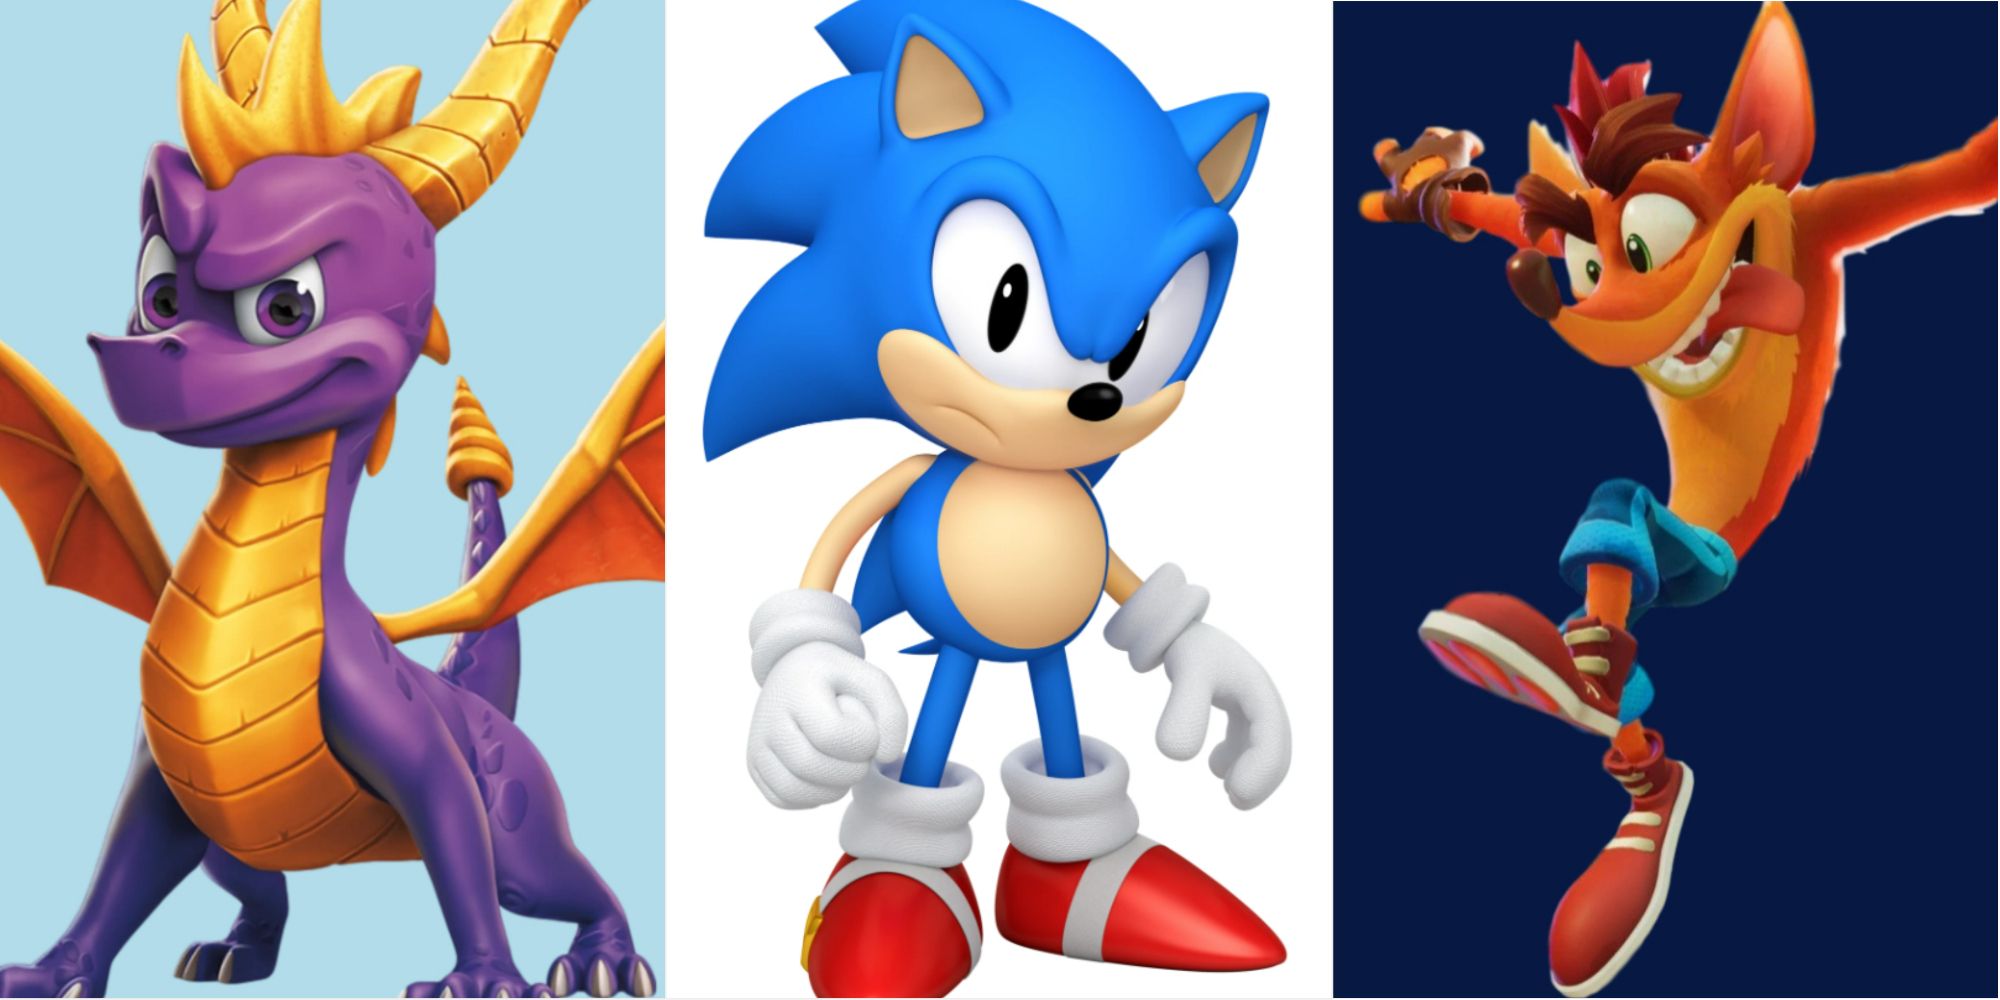 The Video Game Mascots That Sonic The Hedgehog Inspired